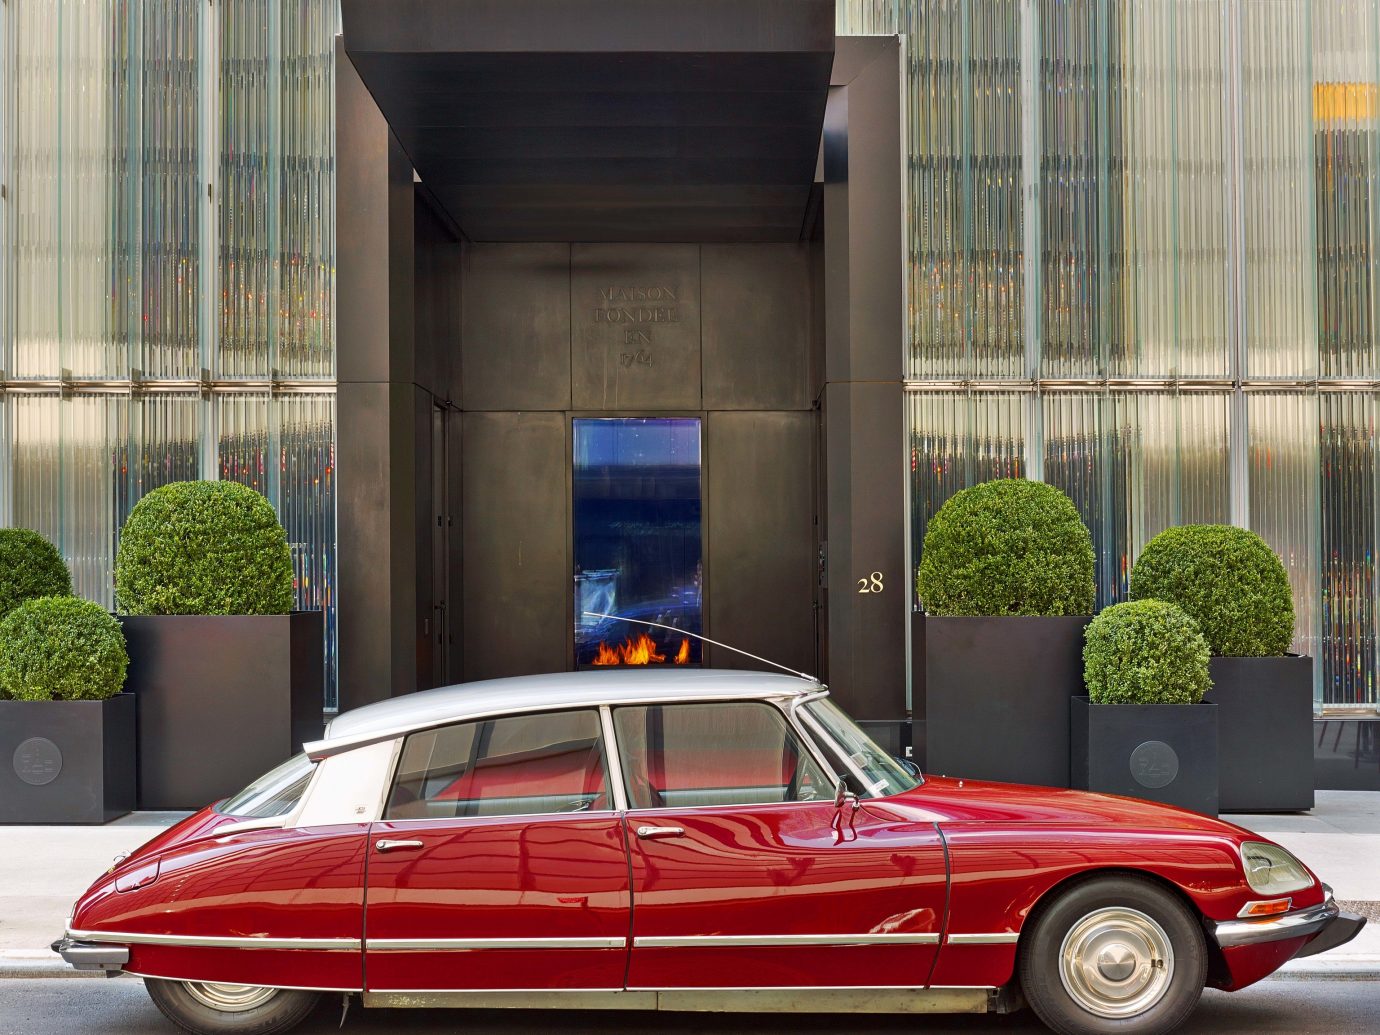 Baccarat Hotel & Residences, Best Hotels in NYC, Offbeat building outdoor car vehicle land vehicle red luxury vehicle automotive design automobile make automotive exterior parked sedan performance car antique car Classic vintage car curb